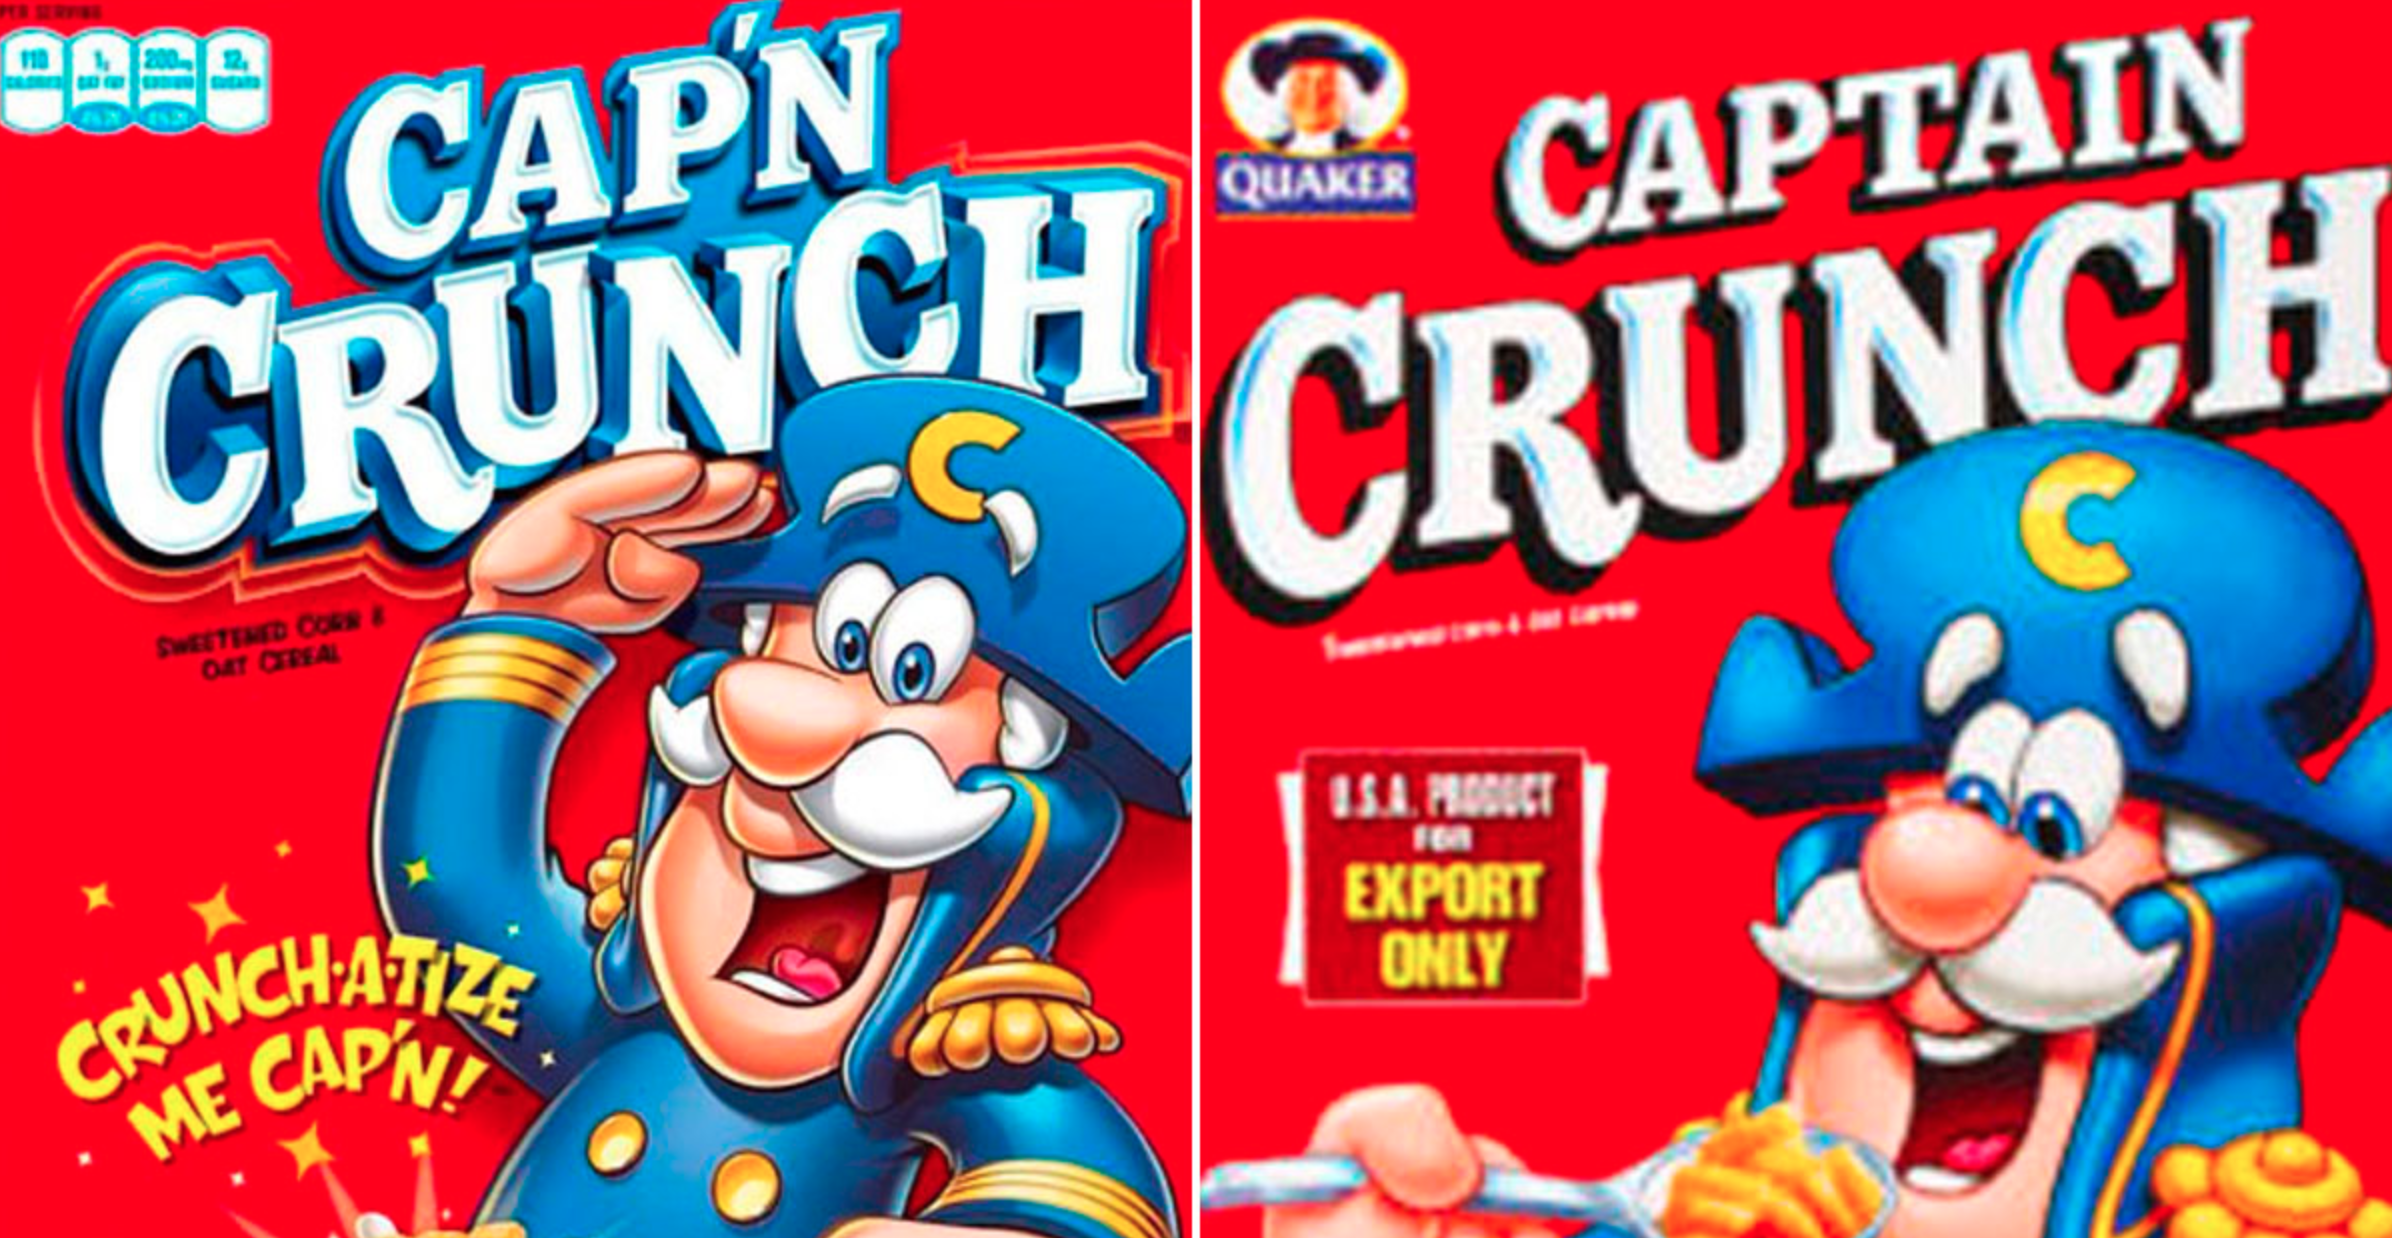 A box of cereal that reads Cap'N Crunch next to a box that says Captain Crunch